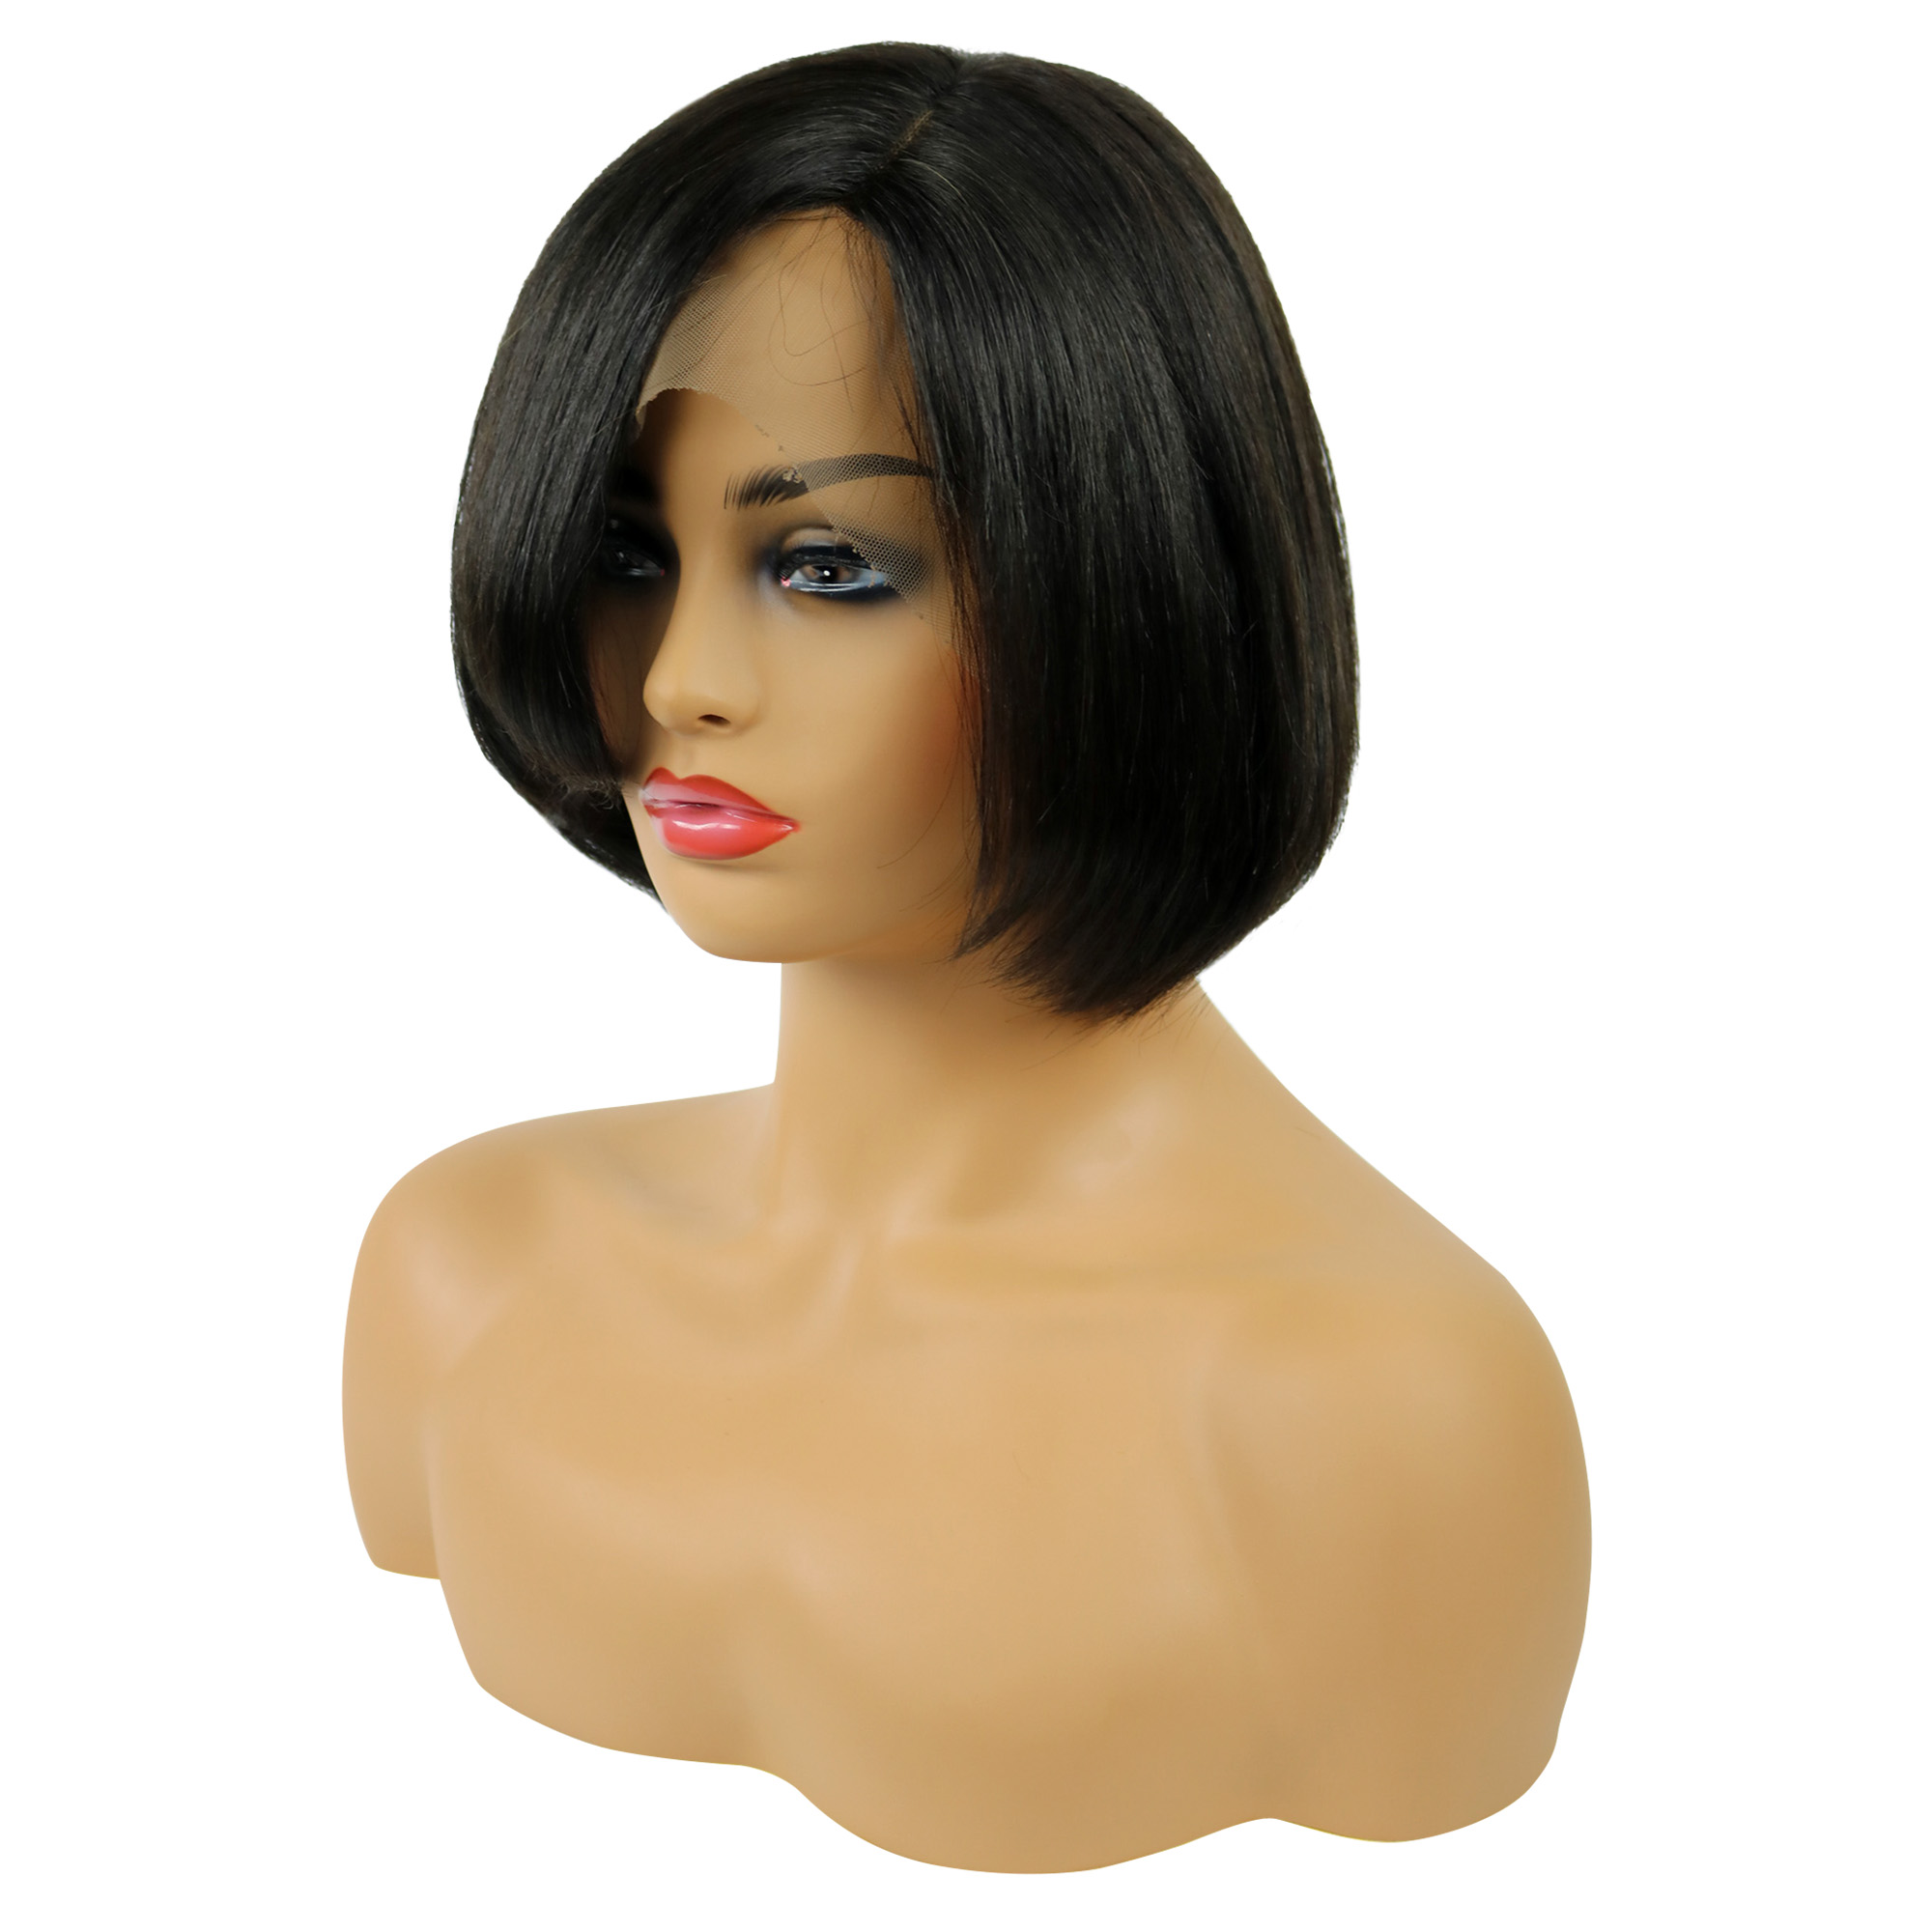 Straight Women Lace Front Cap Human Hair 120% 8 Inches Wigs -  Bob Hair wigs